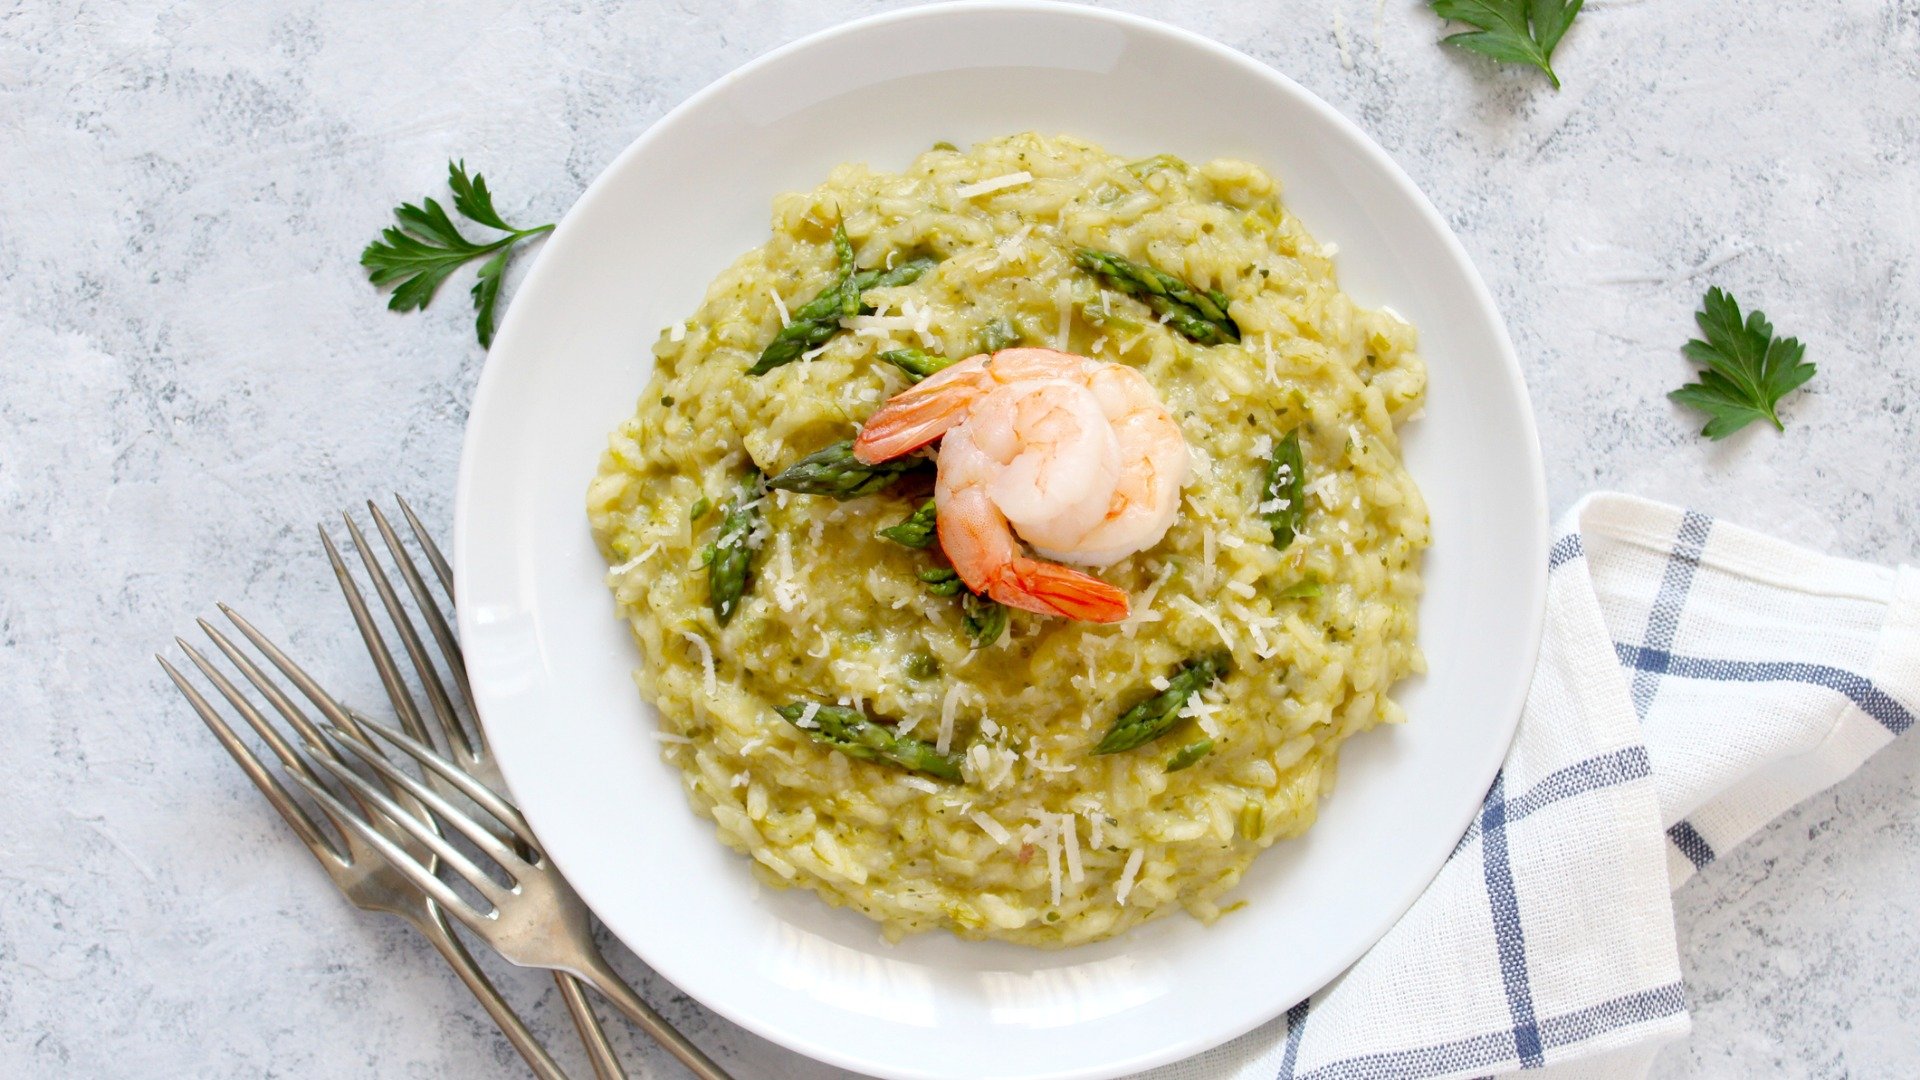 This is a top down image of a dish of Croatian risotto with scampi and asparagus.